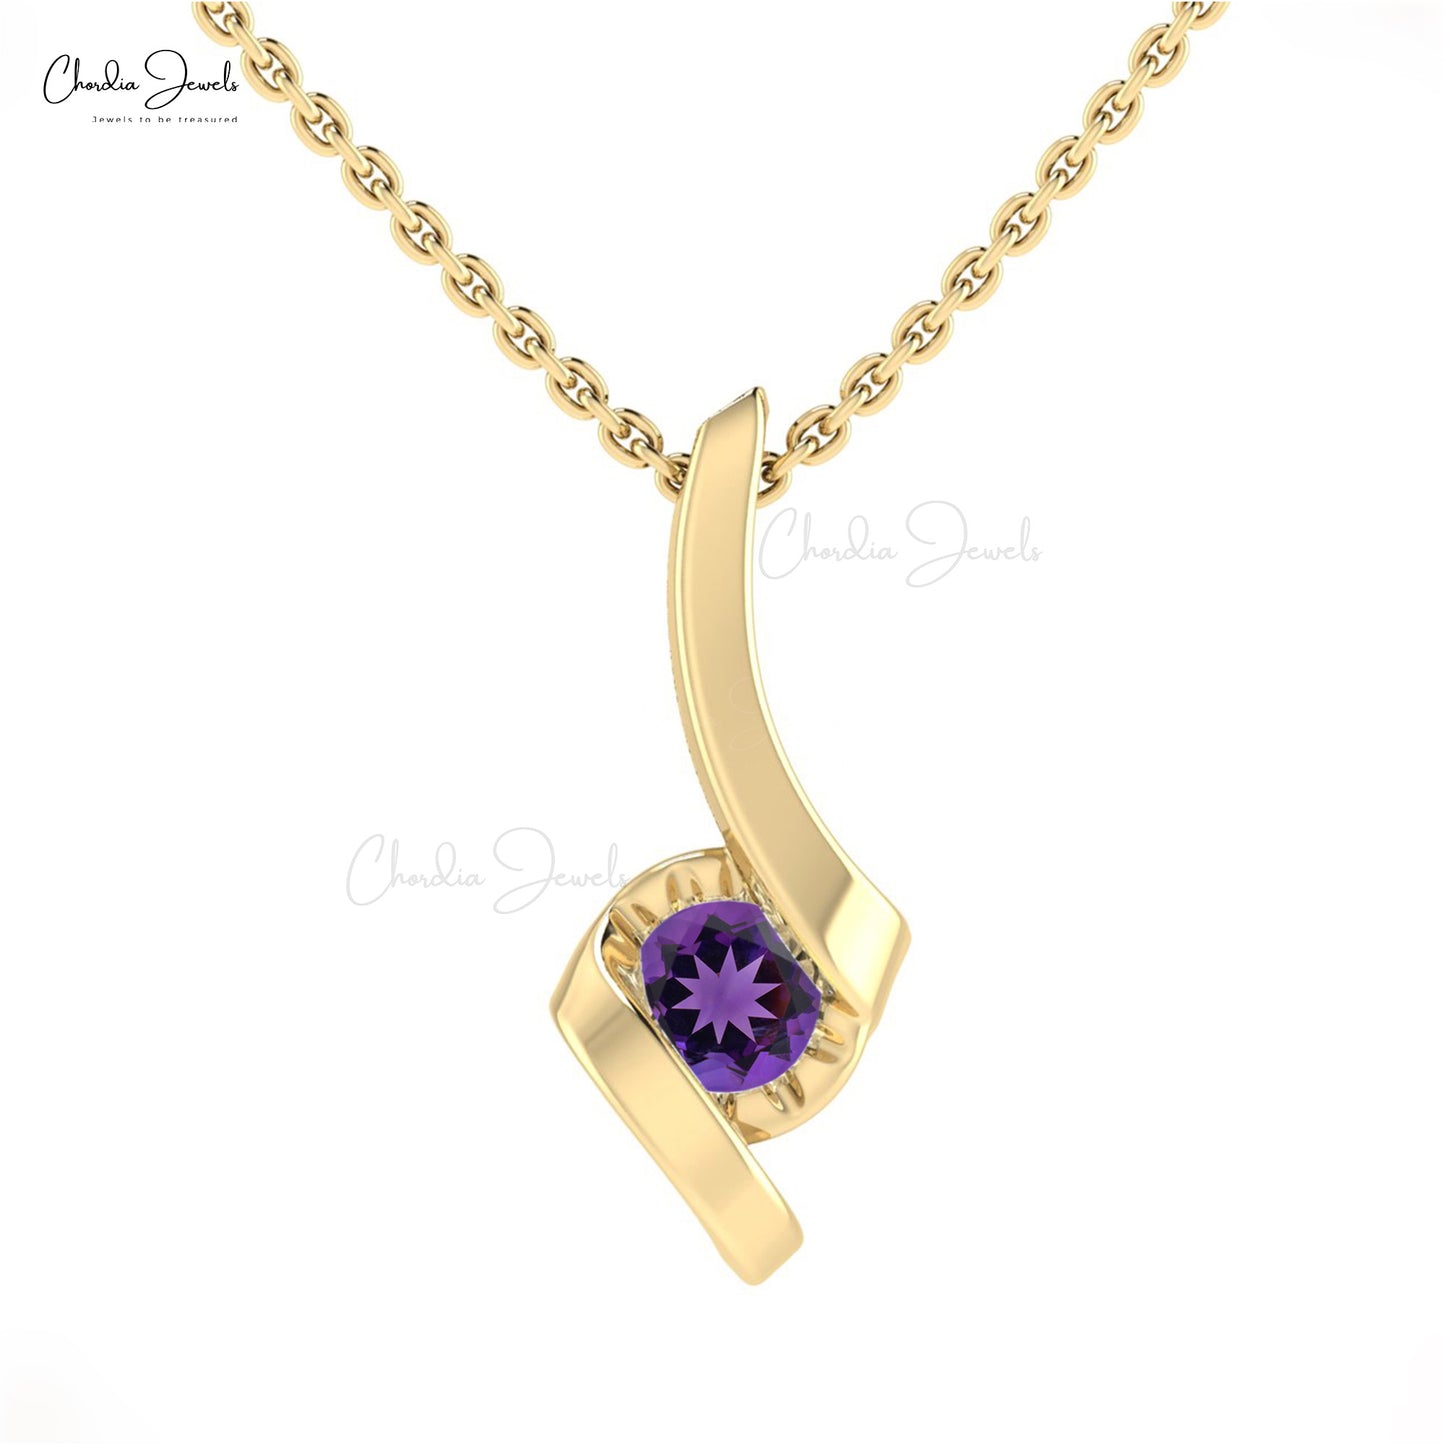 Load image into Gallery viewer, Genuine Amethyst Pendant, 14k Solid Gold Handmade Pendant, 4mm Round Gemstone Solitaire Pendant Gift for Wife
